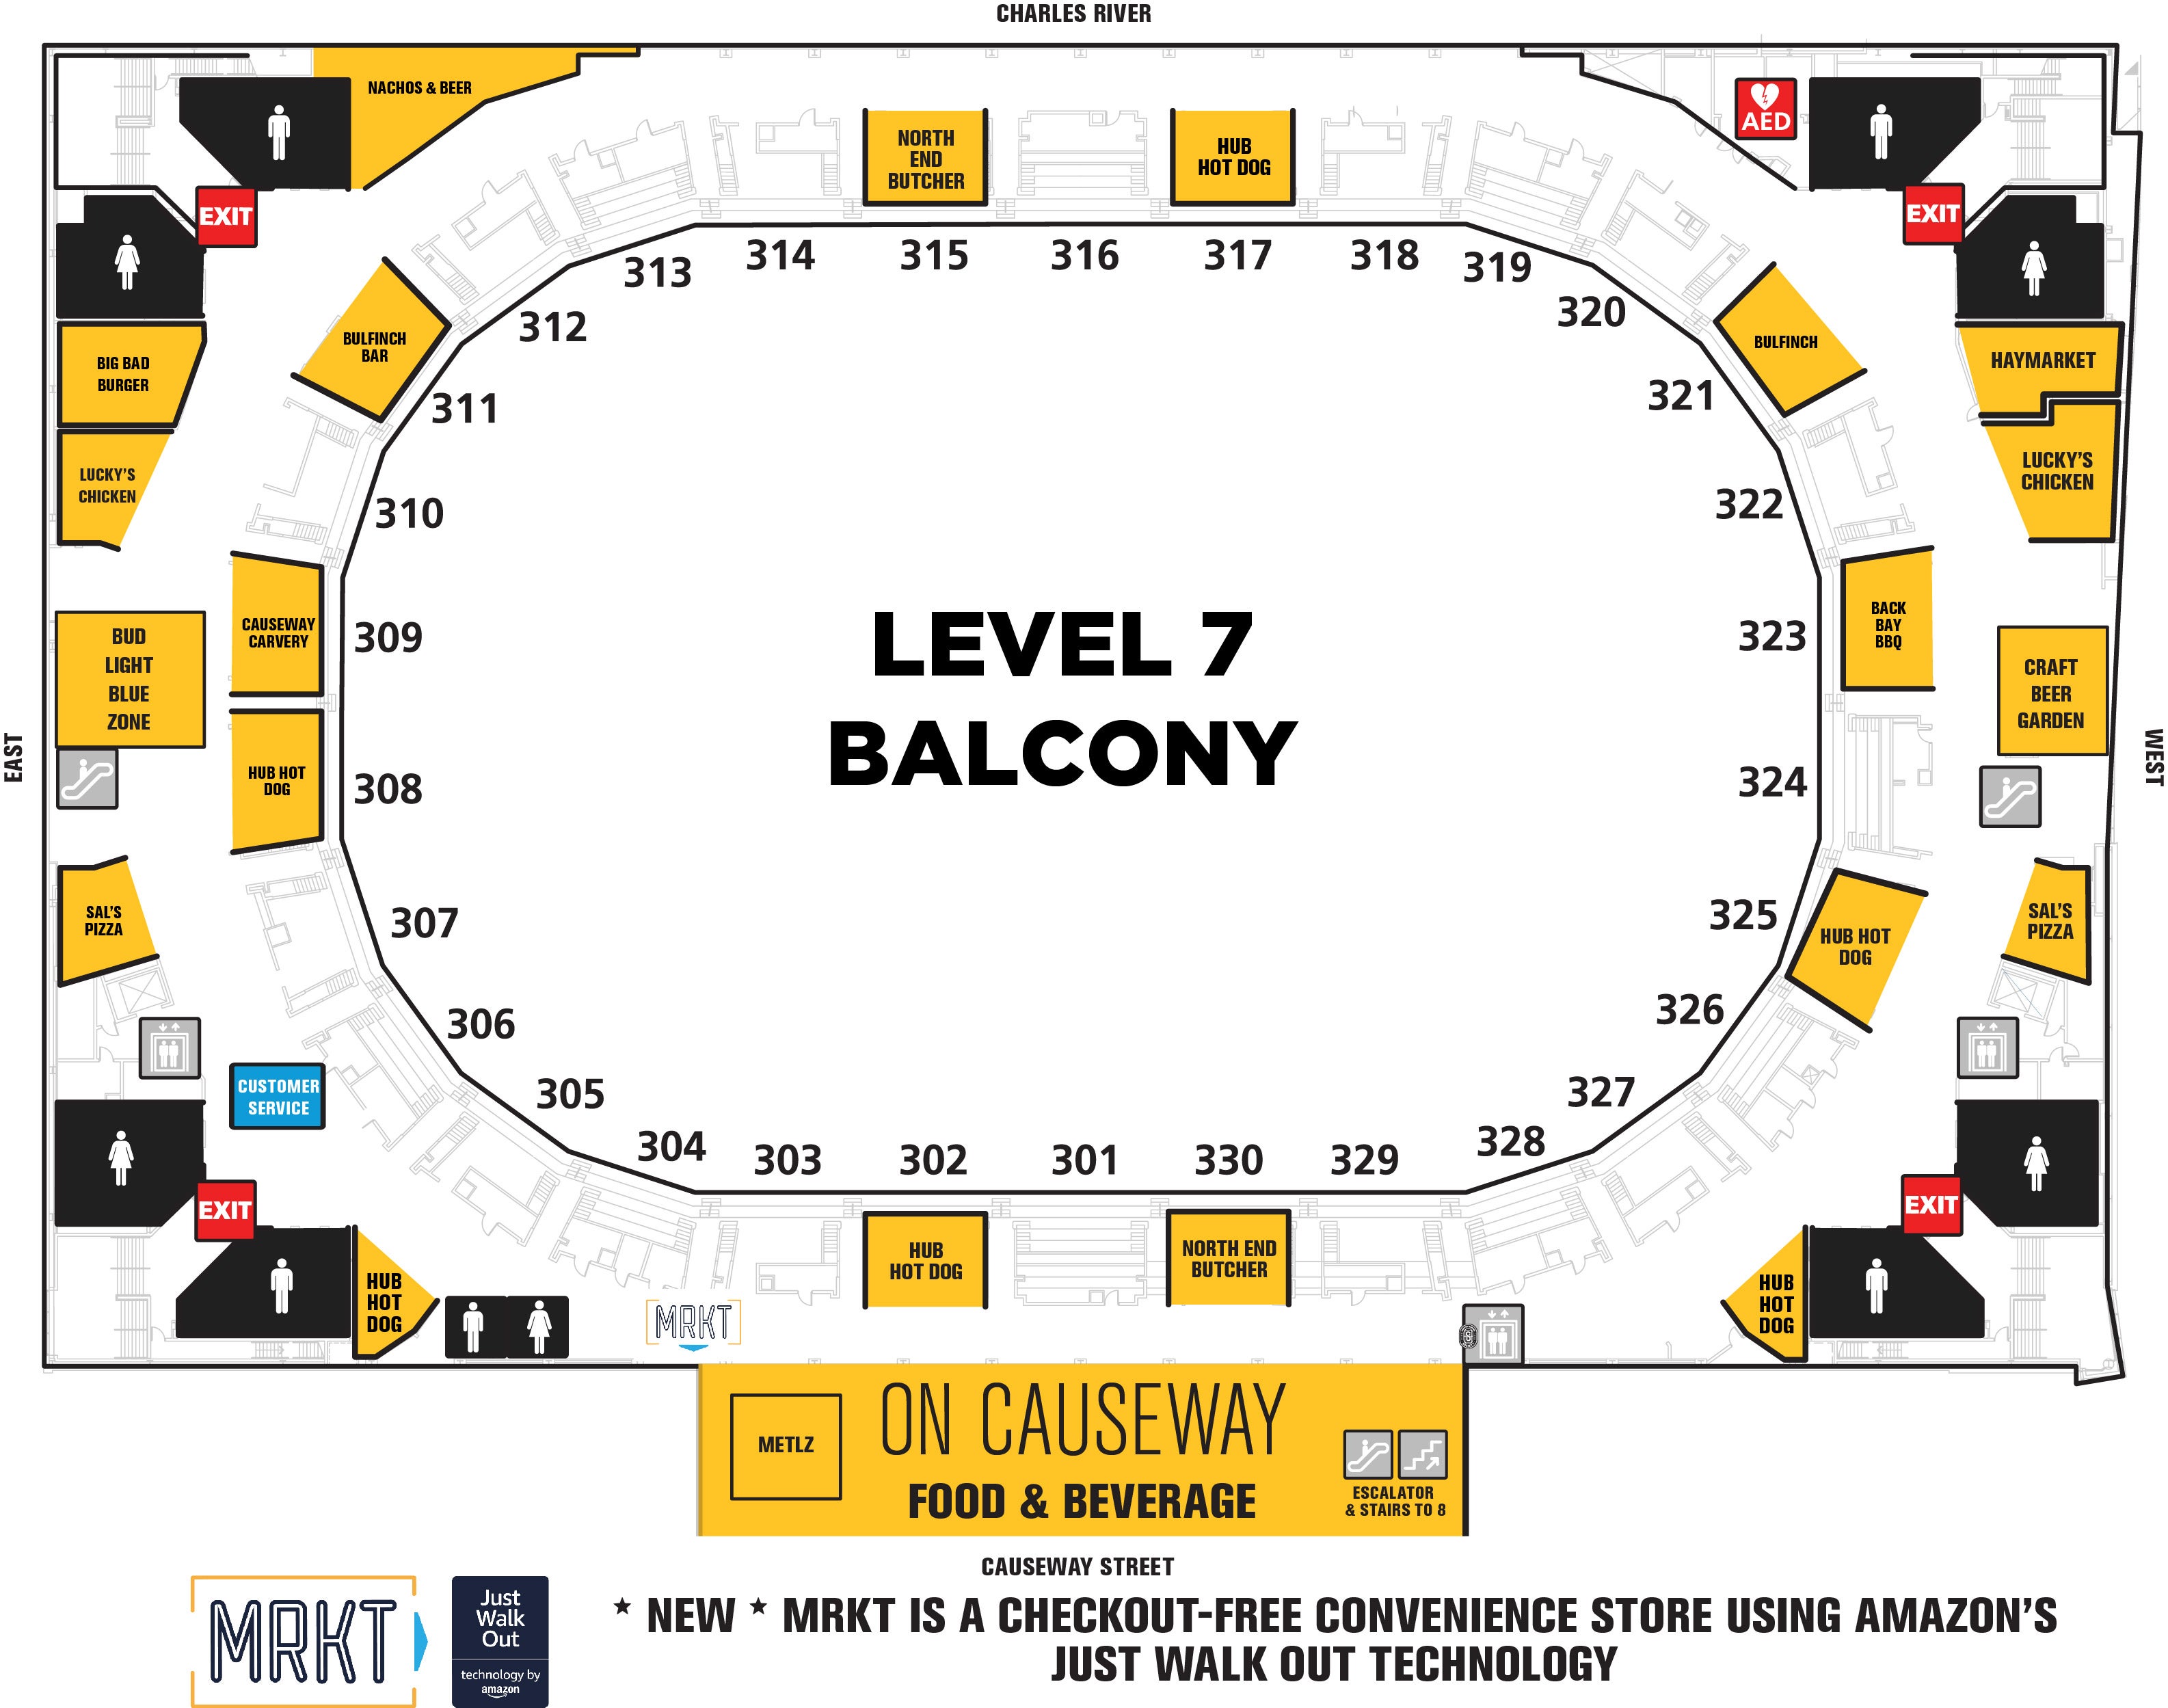 Td Garden Seating Chart With Row Numbers Matttroy